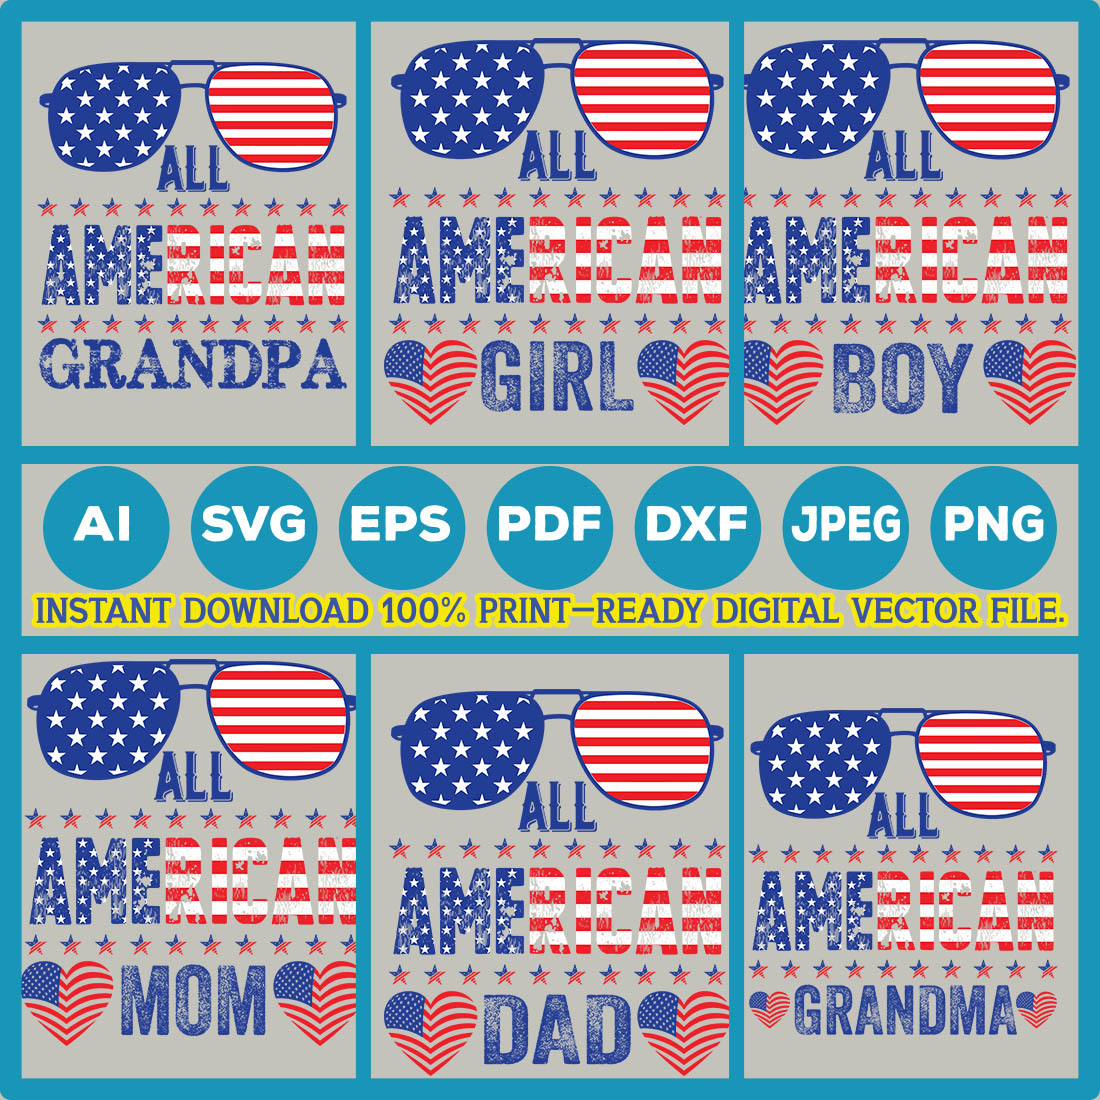 4th July All American Sublimation the Heart of the Family Quotes Bundle Vintage Typography Retro Svg Bundle T-Shirt Design Happy M4th July All American Sublimation Love is the Heart of the Family, It's All About Happy Mother Day Vintage Typography Retro Tshirt Design | Ai, Svg, Eps, Dxf, PDF, Jpeg, Png, Instant download Digital File T-Shirt Design | 100% print-ready Digital vector file cover image.